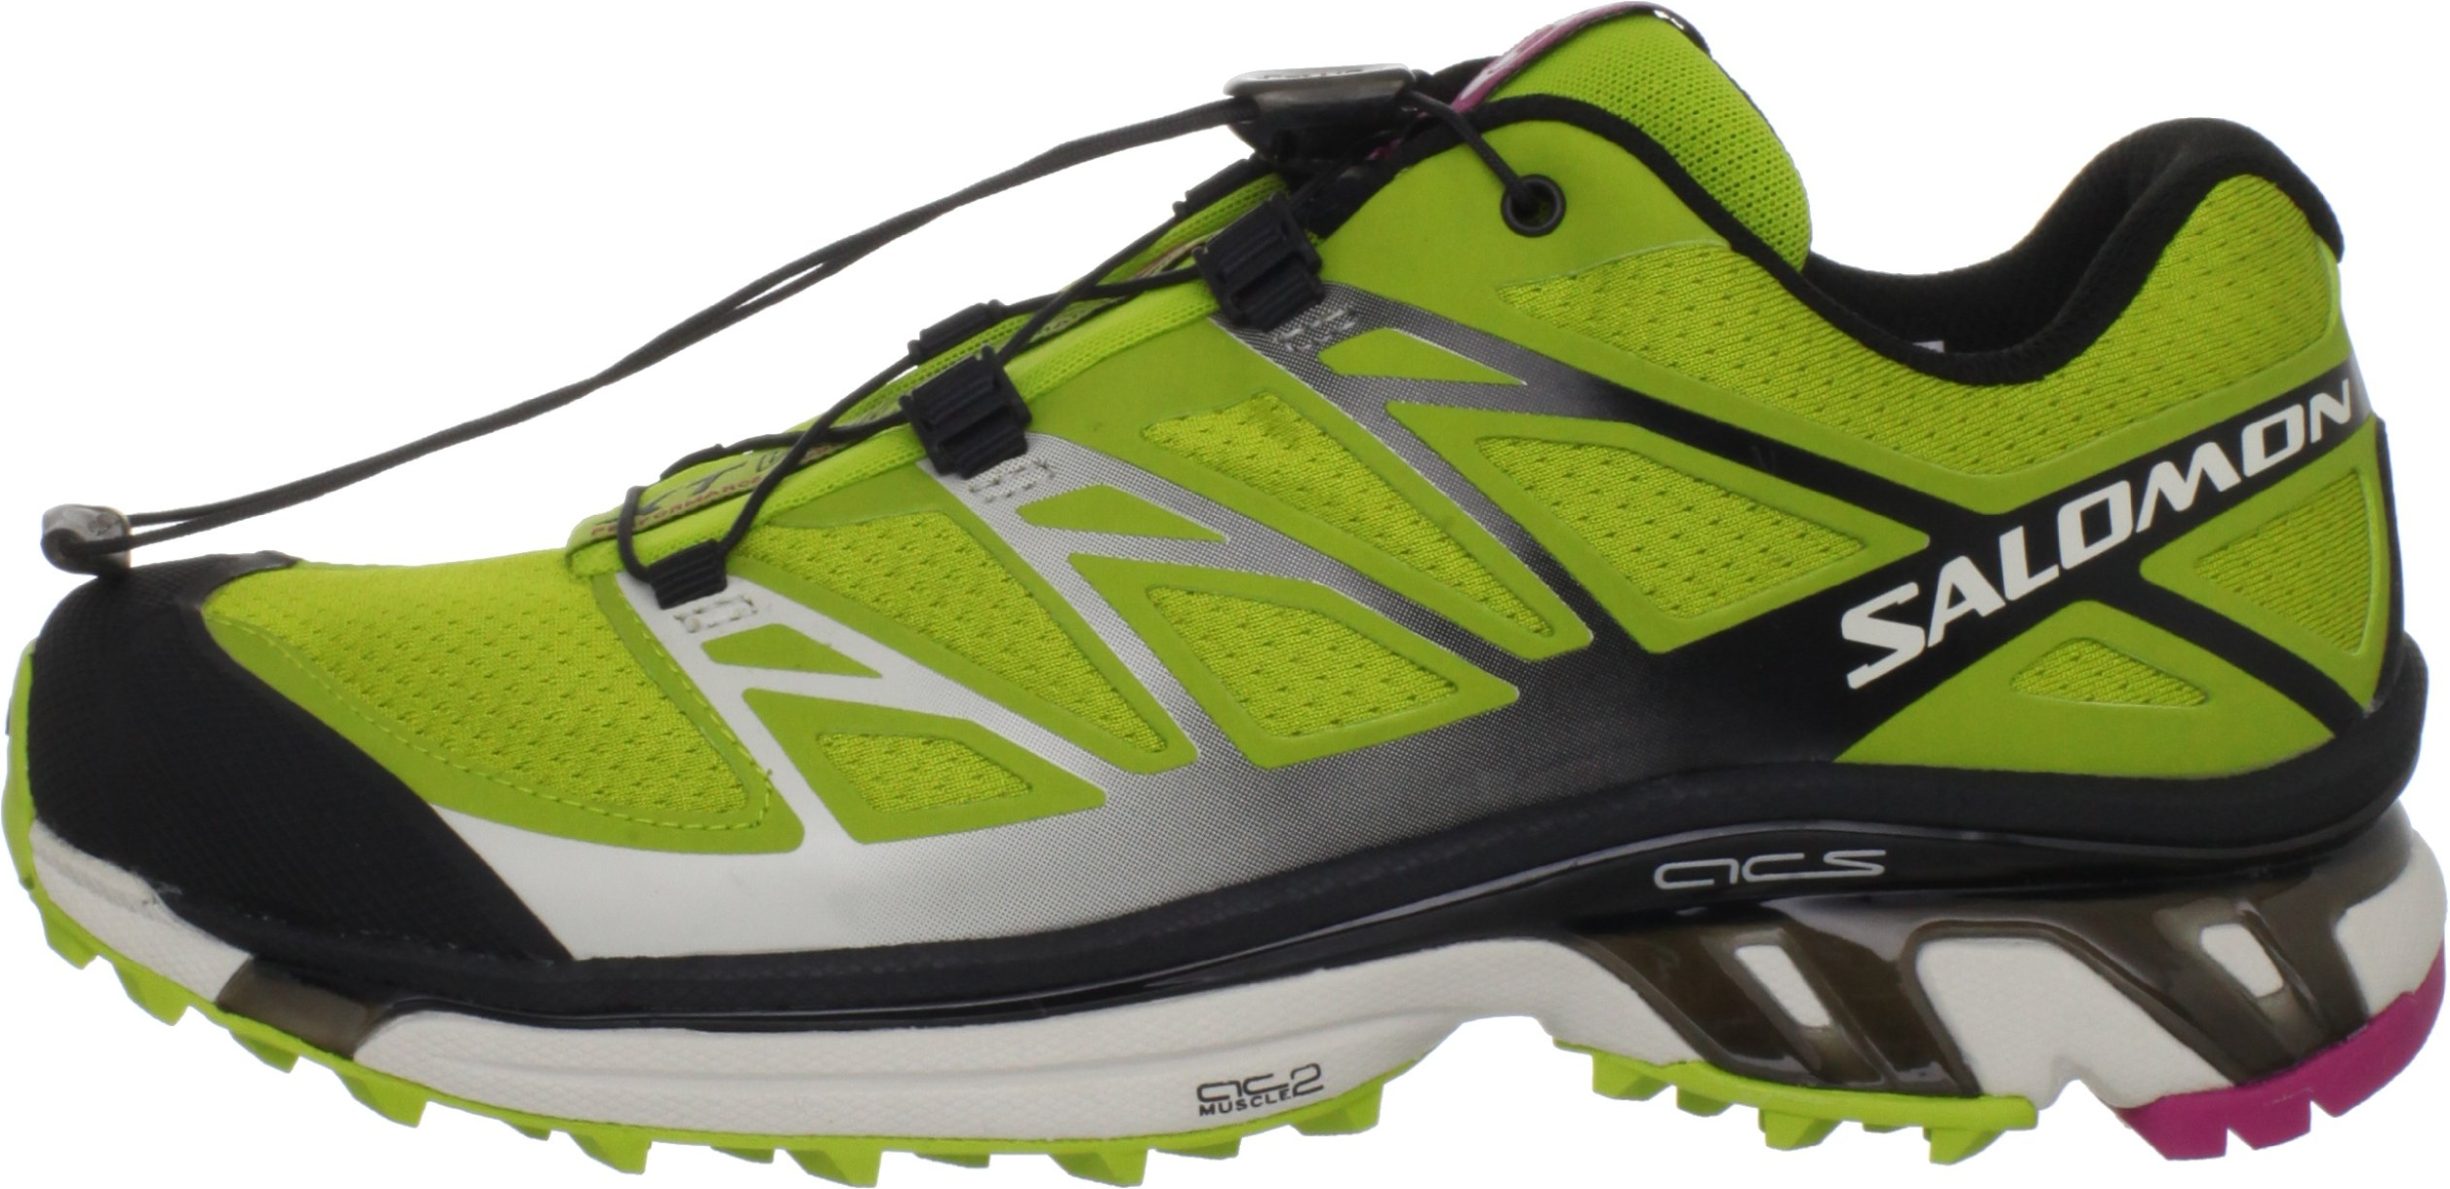 overpronation trail running shoes